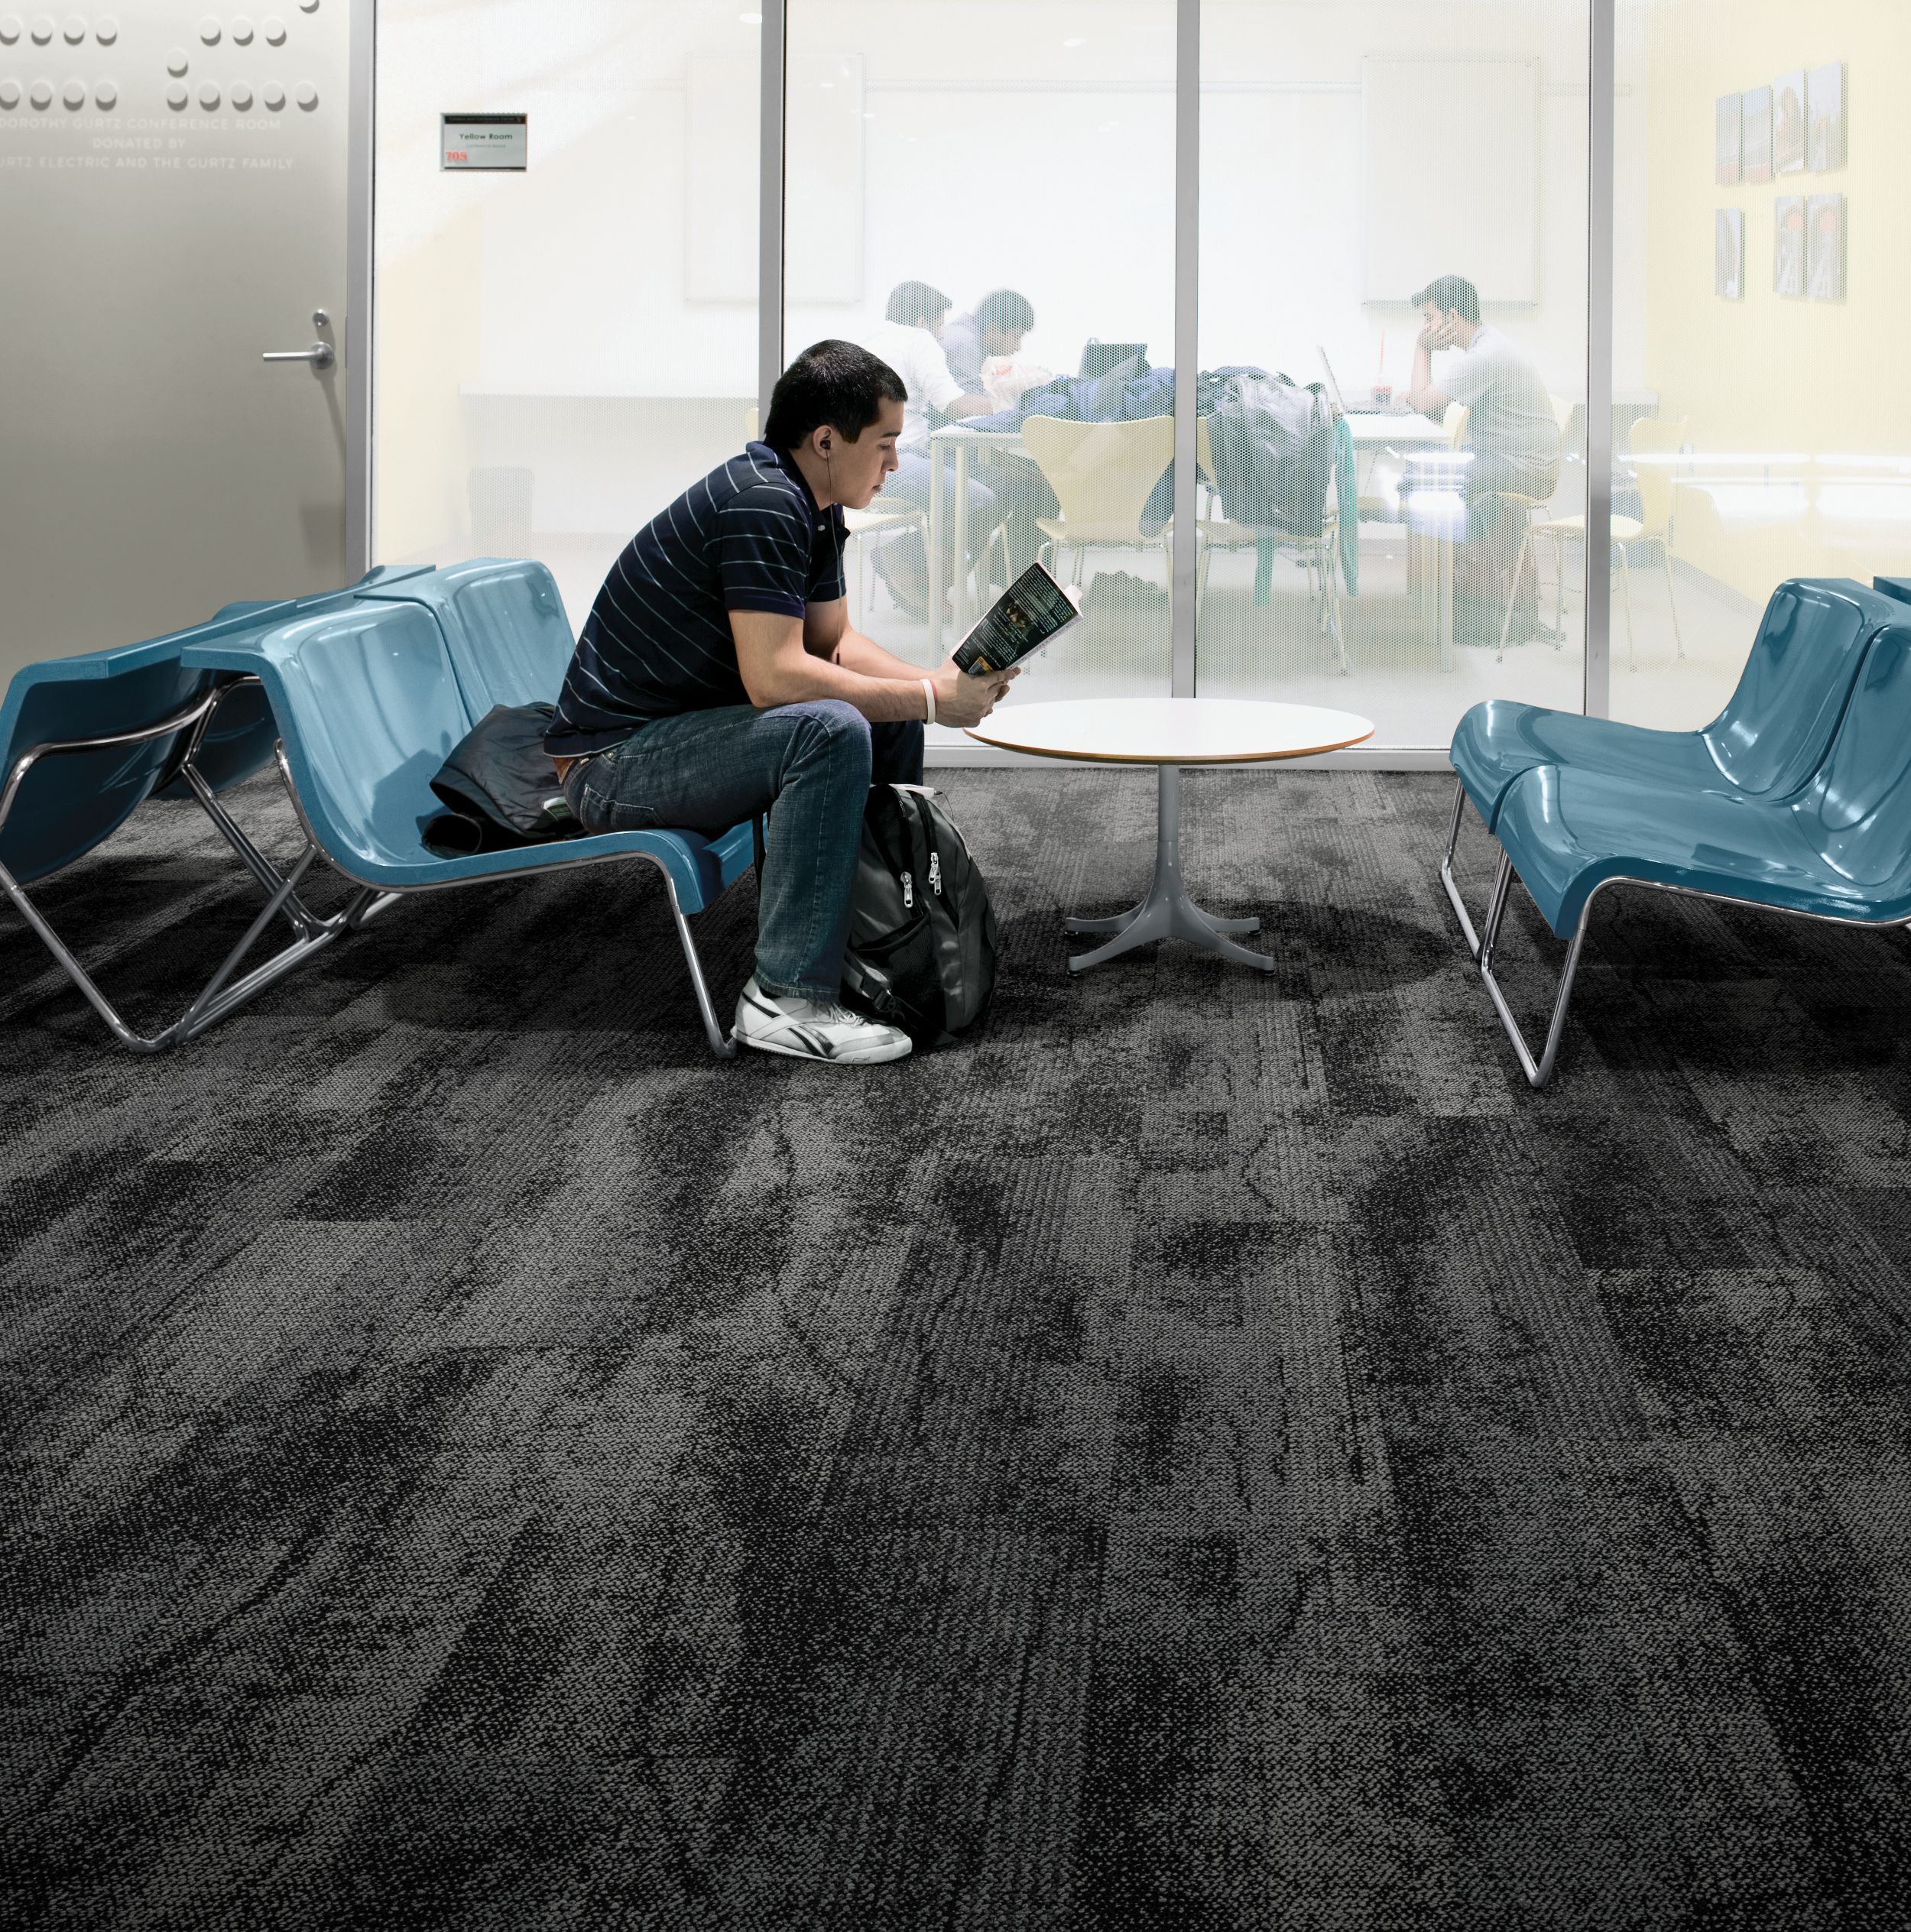 Interface Neighborhood Smooth plank carpet tile in public education space with man reading a book on blue chair numéro d’image 6